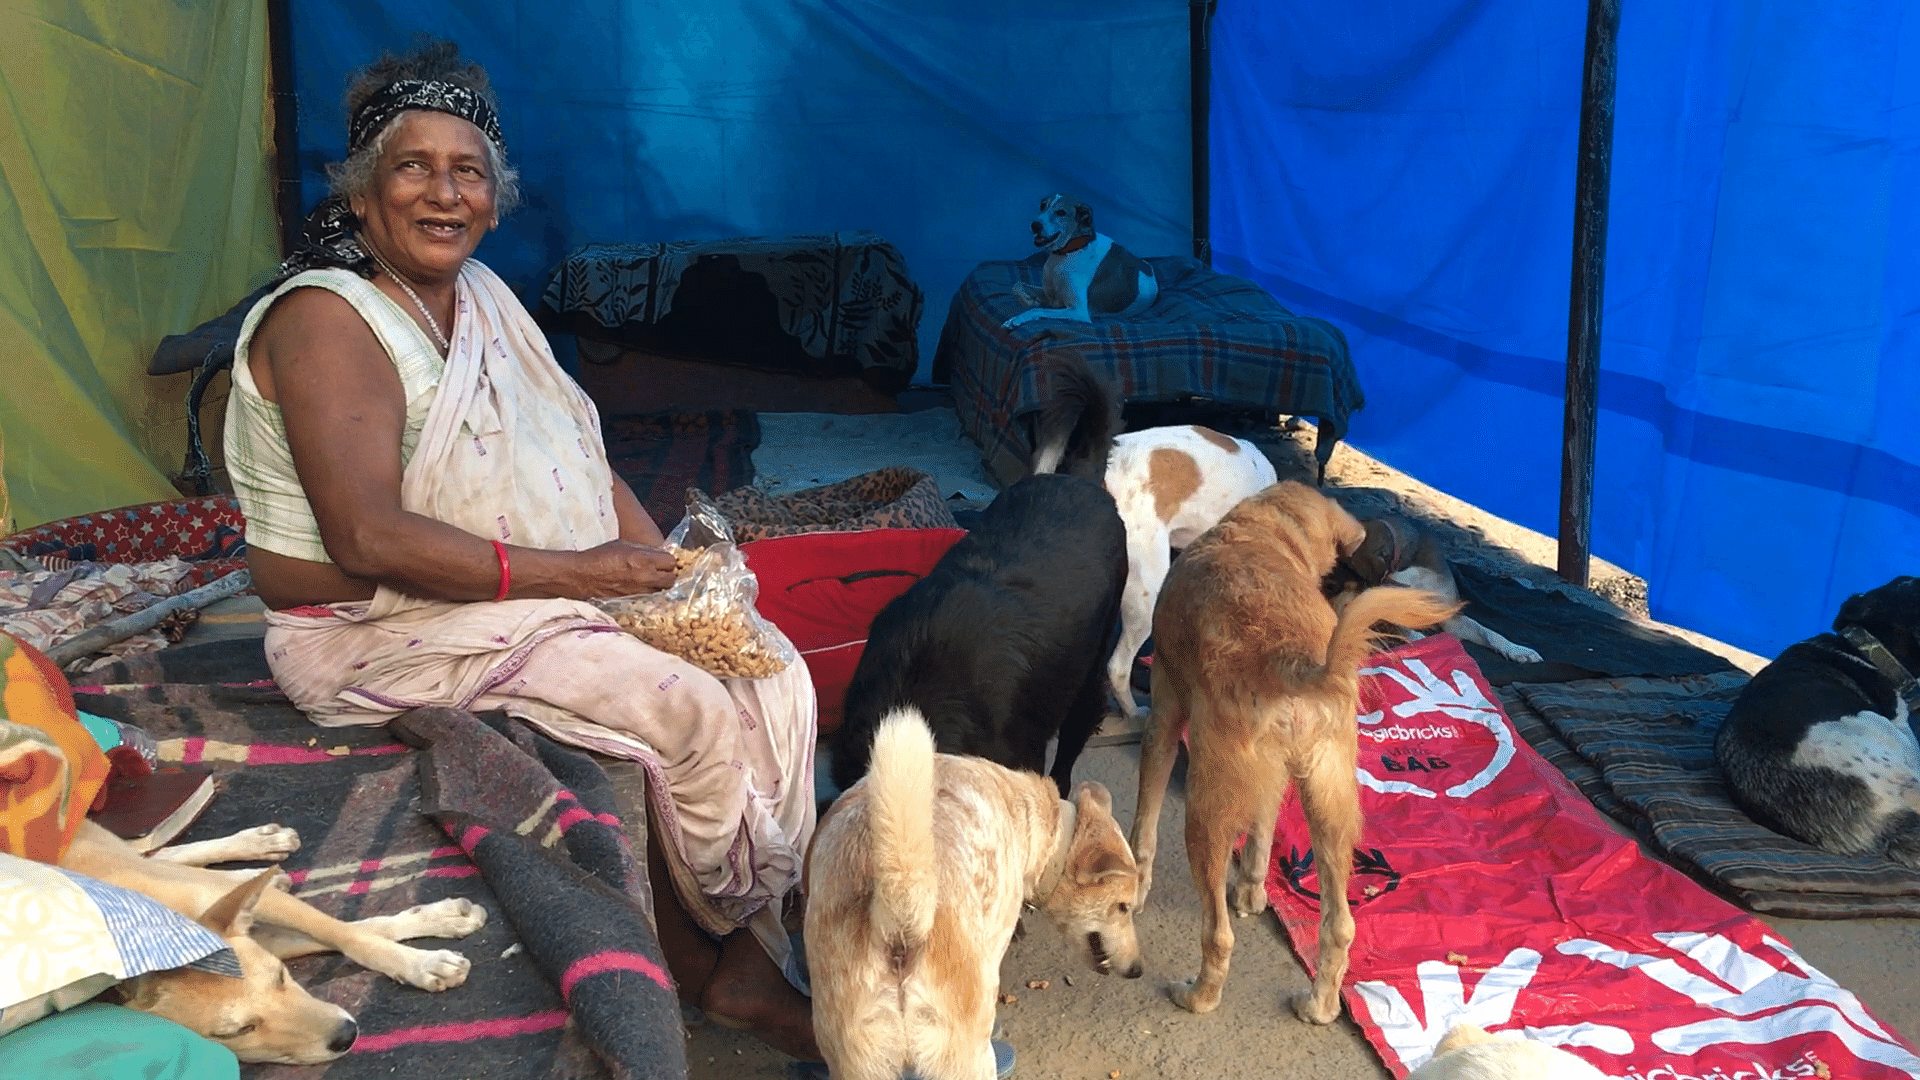 A Ragpicker's Home for 35 Years, Dog Shelter Demolished in Delhi